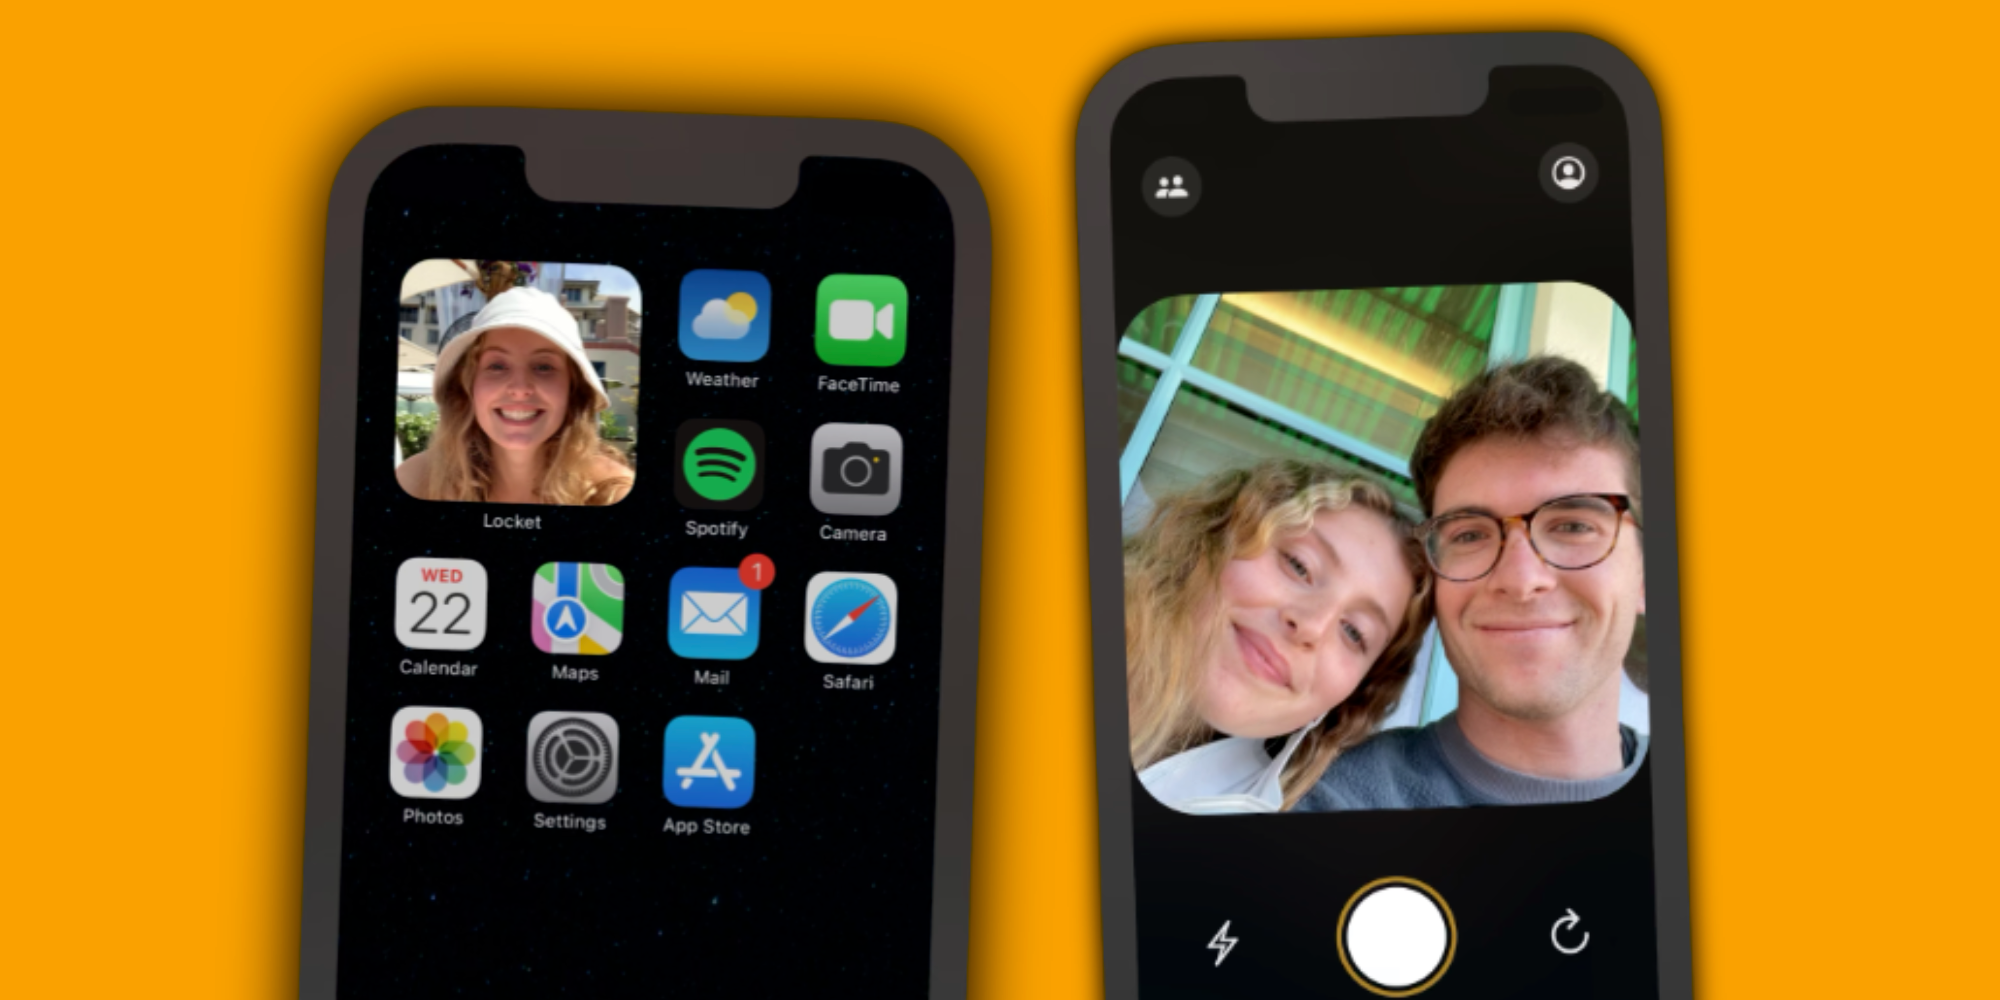 Locket app will put your face on your friends' home screen